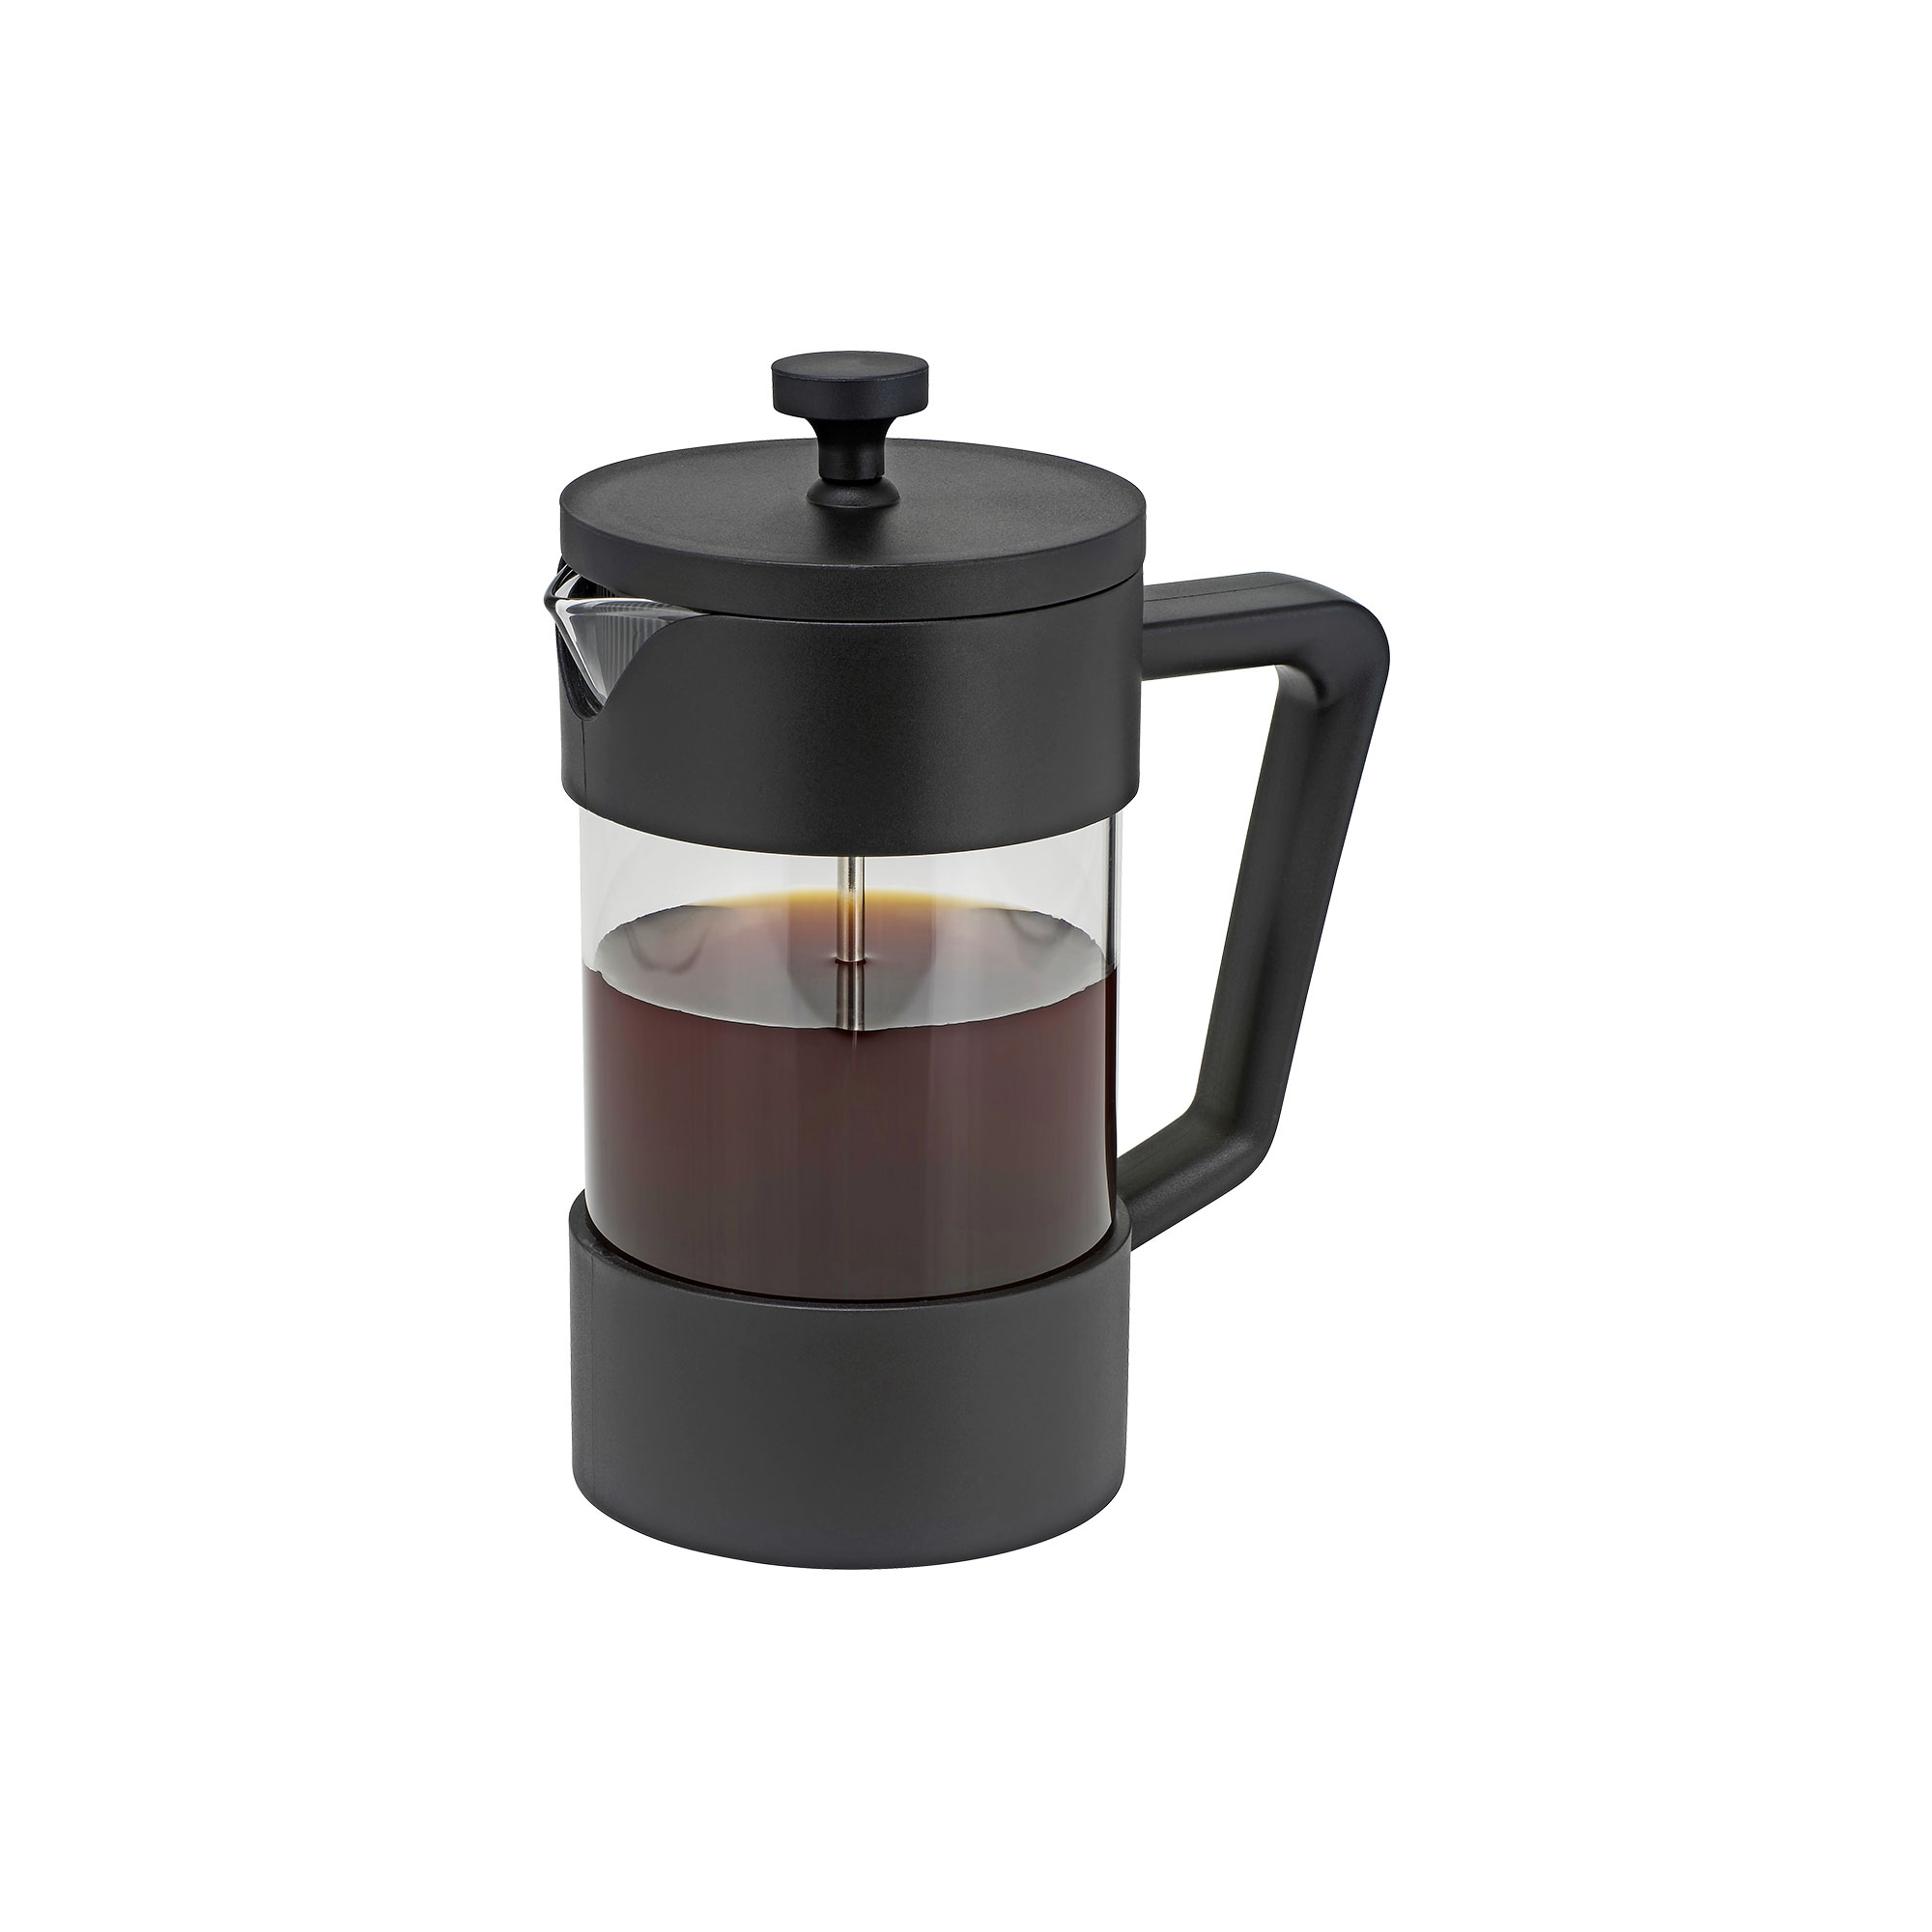 Avanti Sorrento Coffee Plunger 2 Cup Image 1